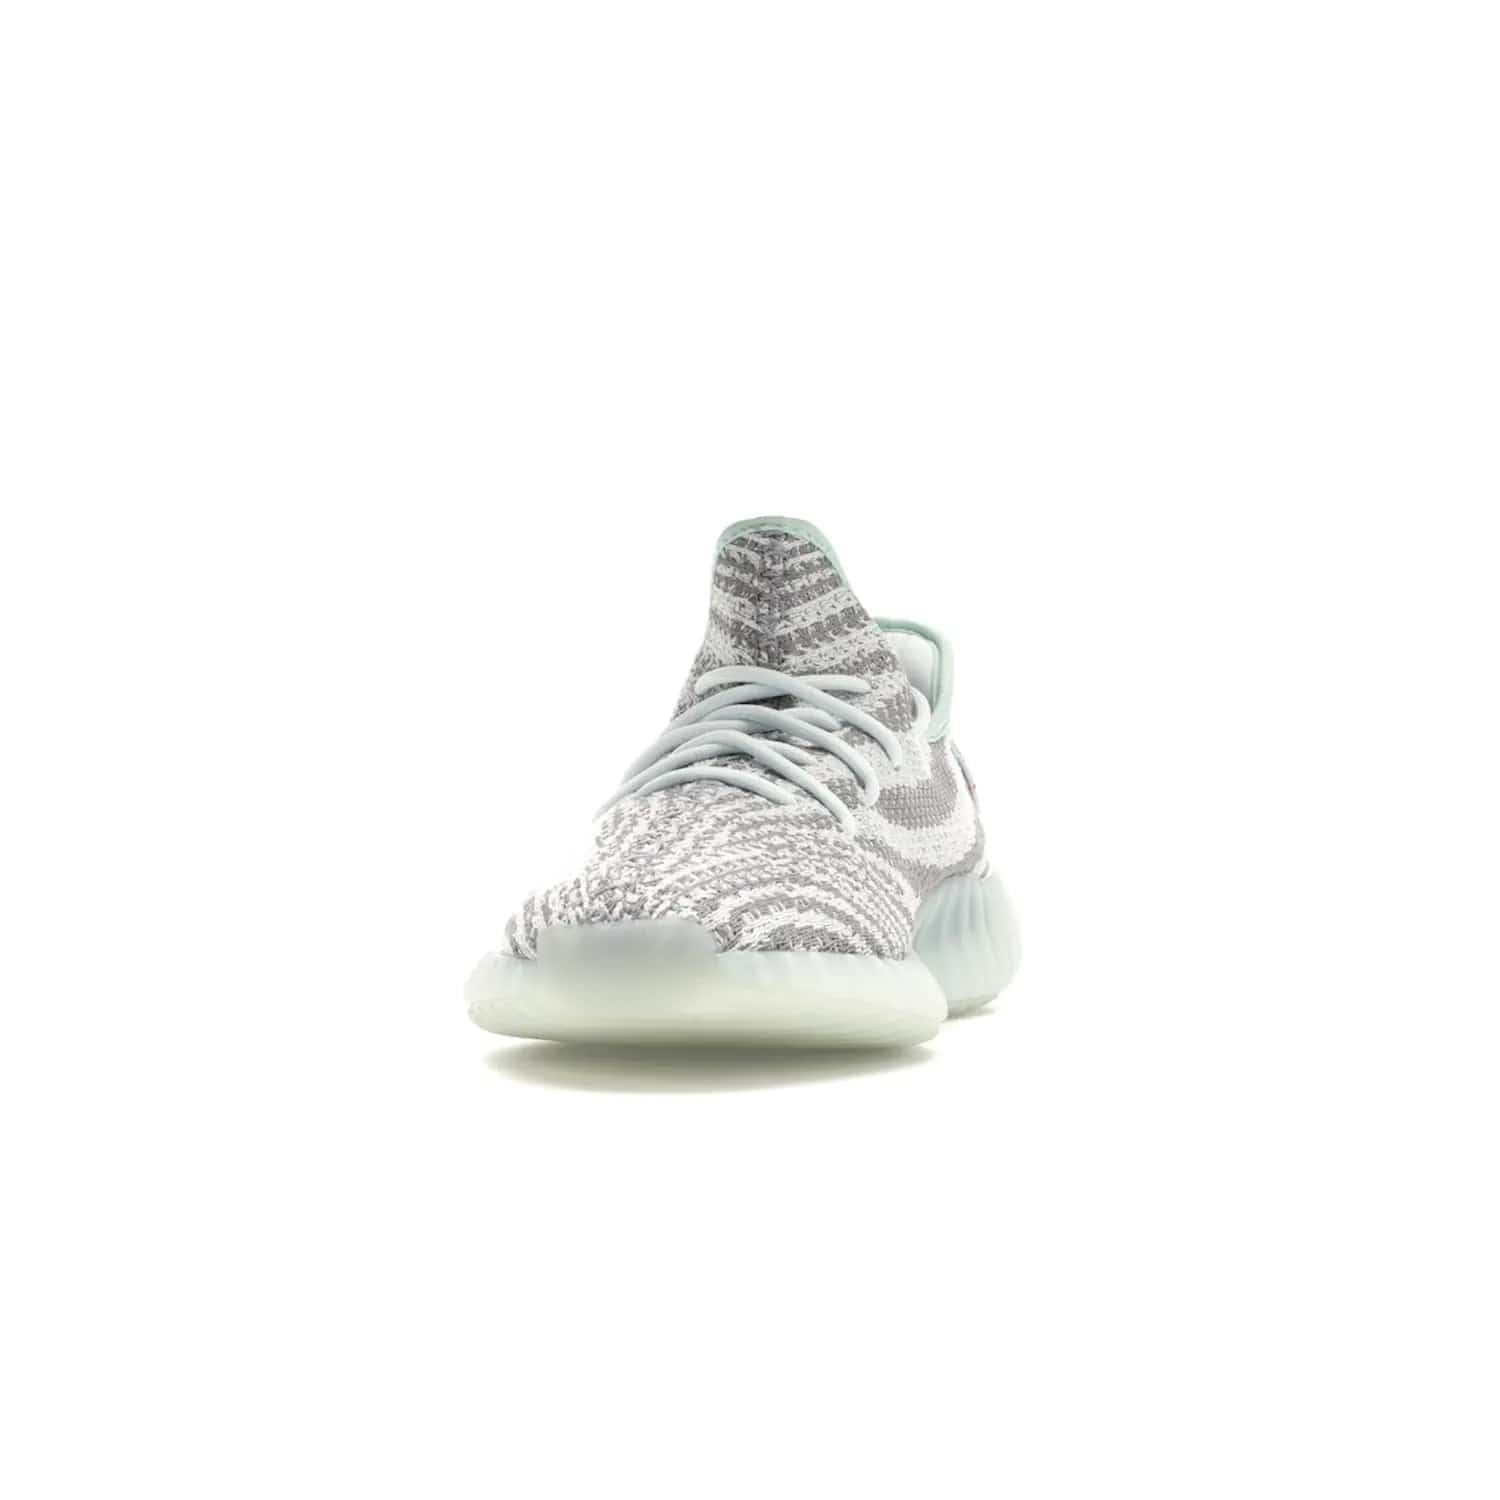 adidas Yeezy Boost 350 V2 Blue Tint - Image 12 - Only at www.BallersClubKickz.com - The adidas Yeezy Boost 350 V2 Blue Tint merges fashion and functionality with its Primeknit upper and Boost sole. Released in December 2017, this luxurious sneaker is perfect for making a stylish statement.